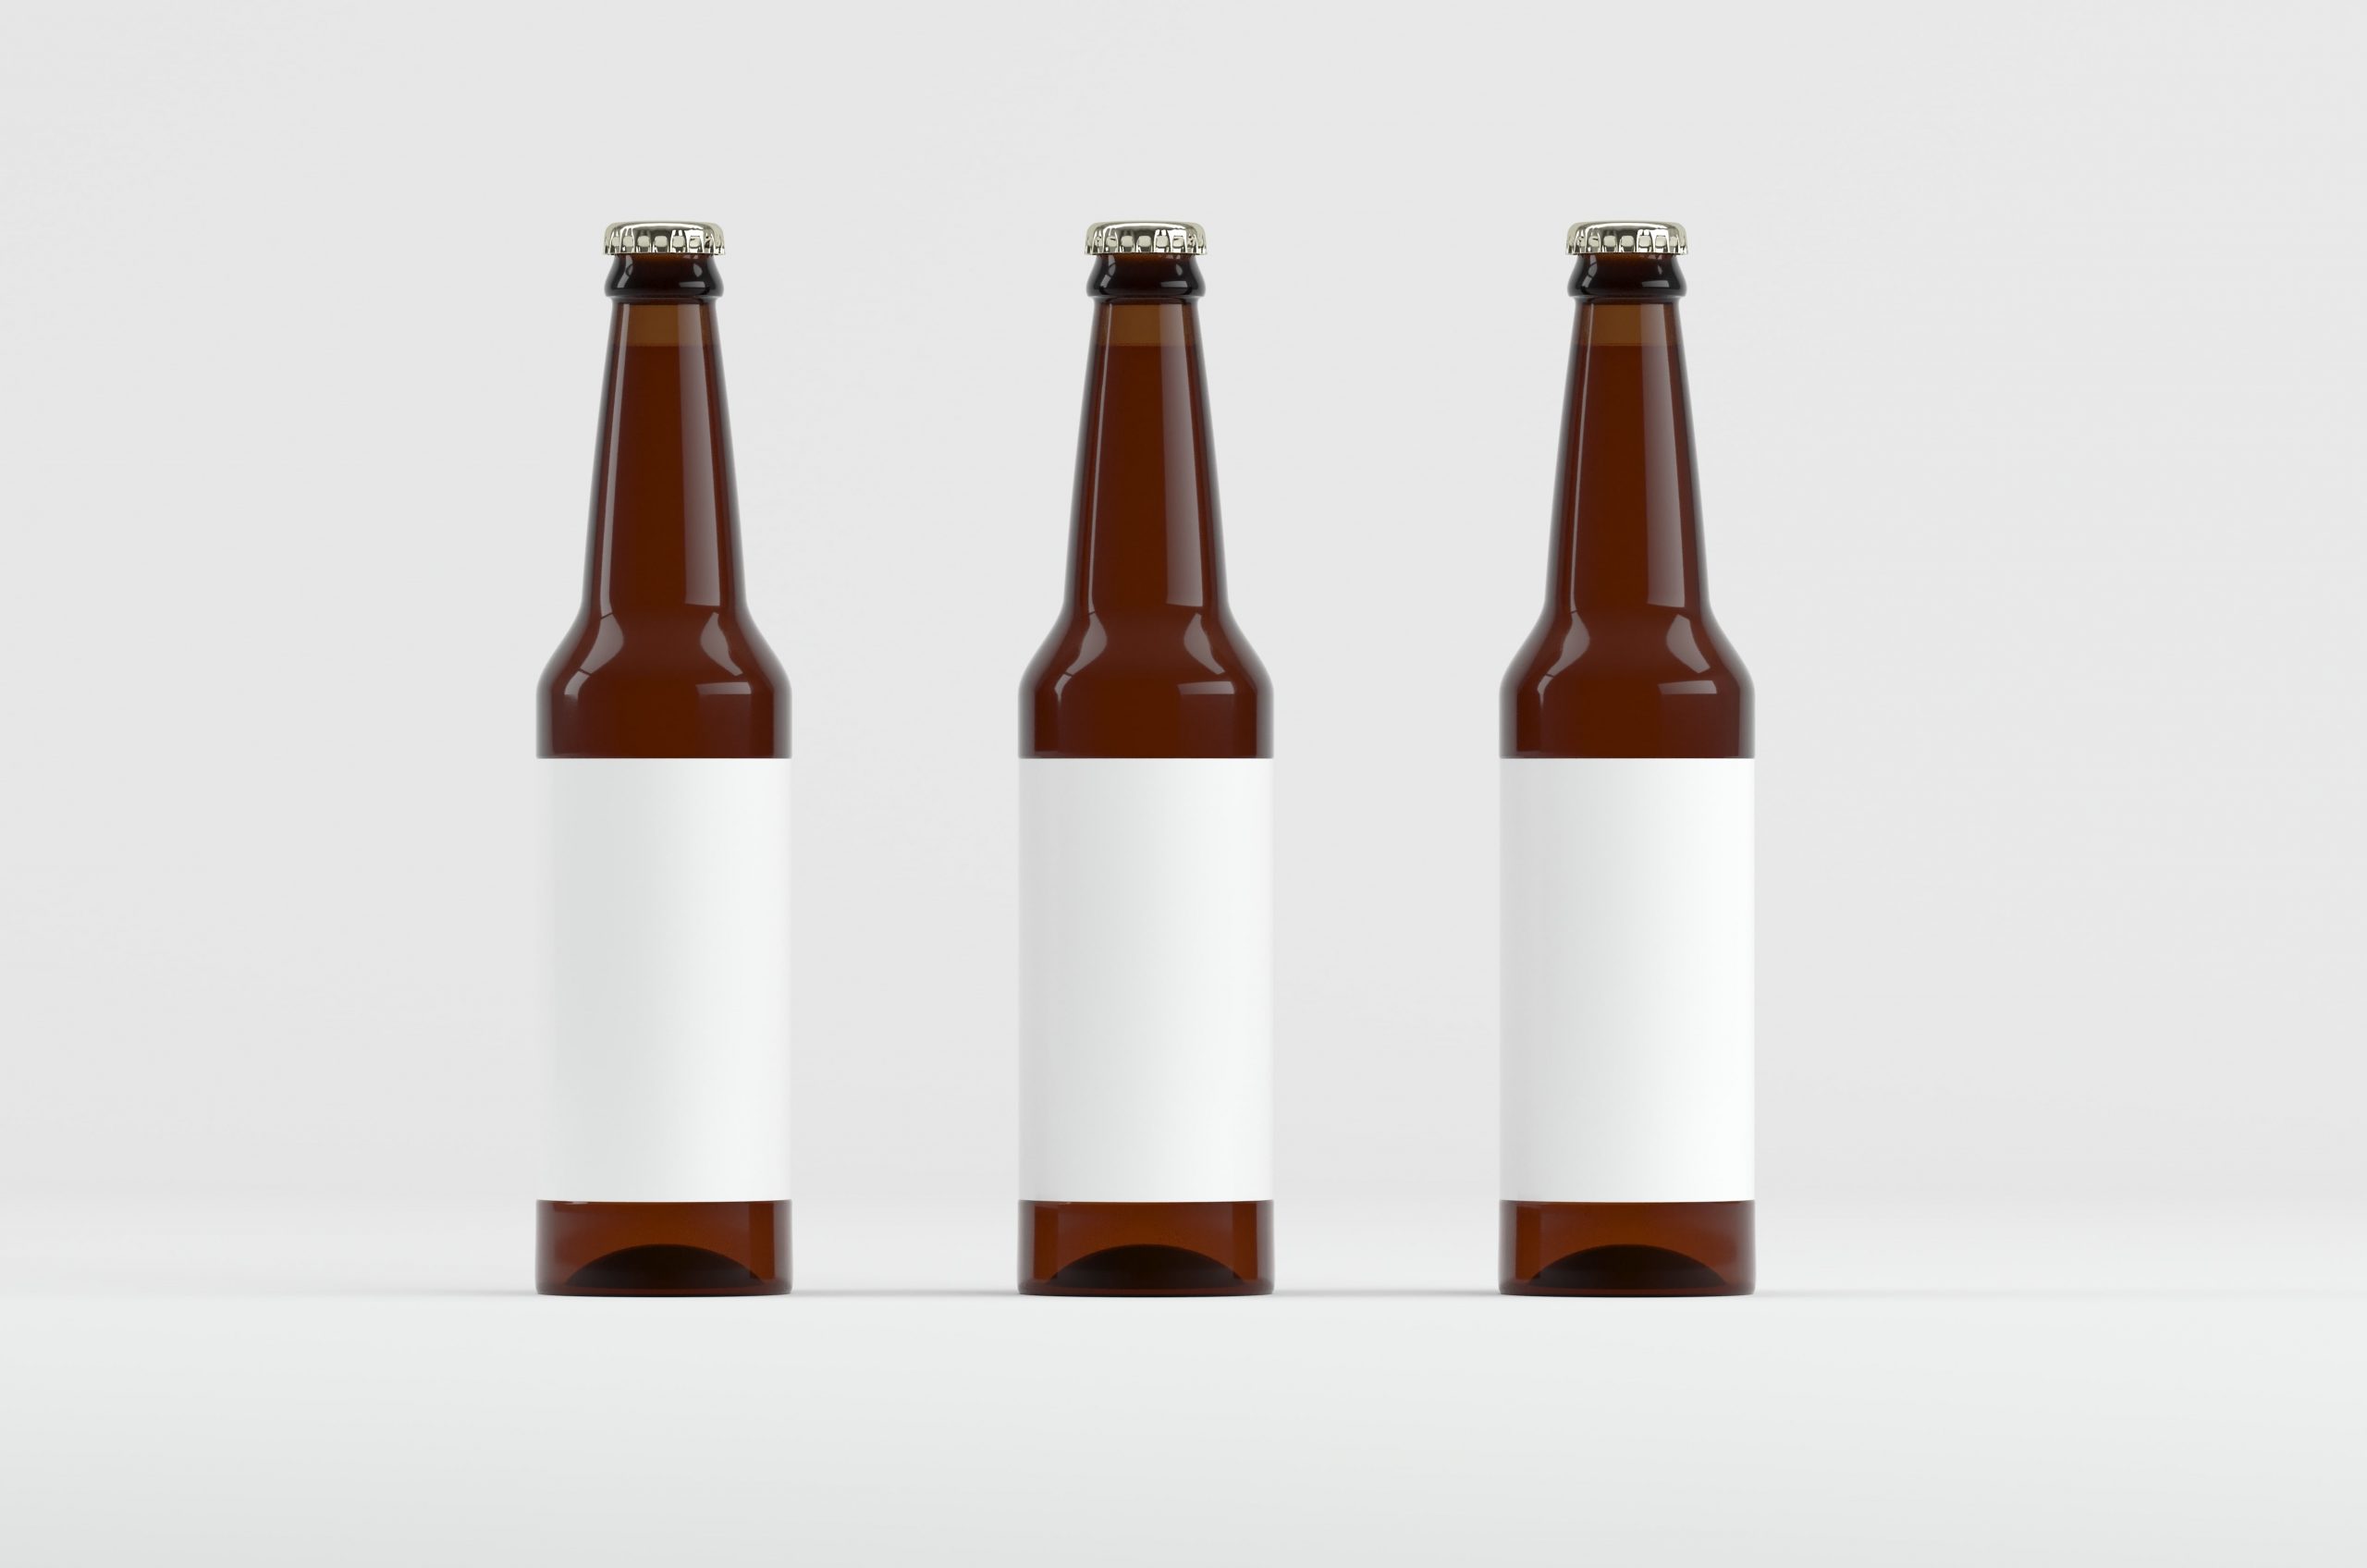 3D Printed Alcohol Industry Leaders